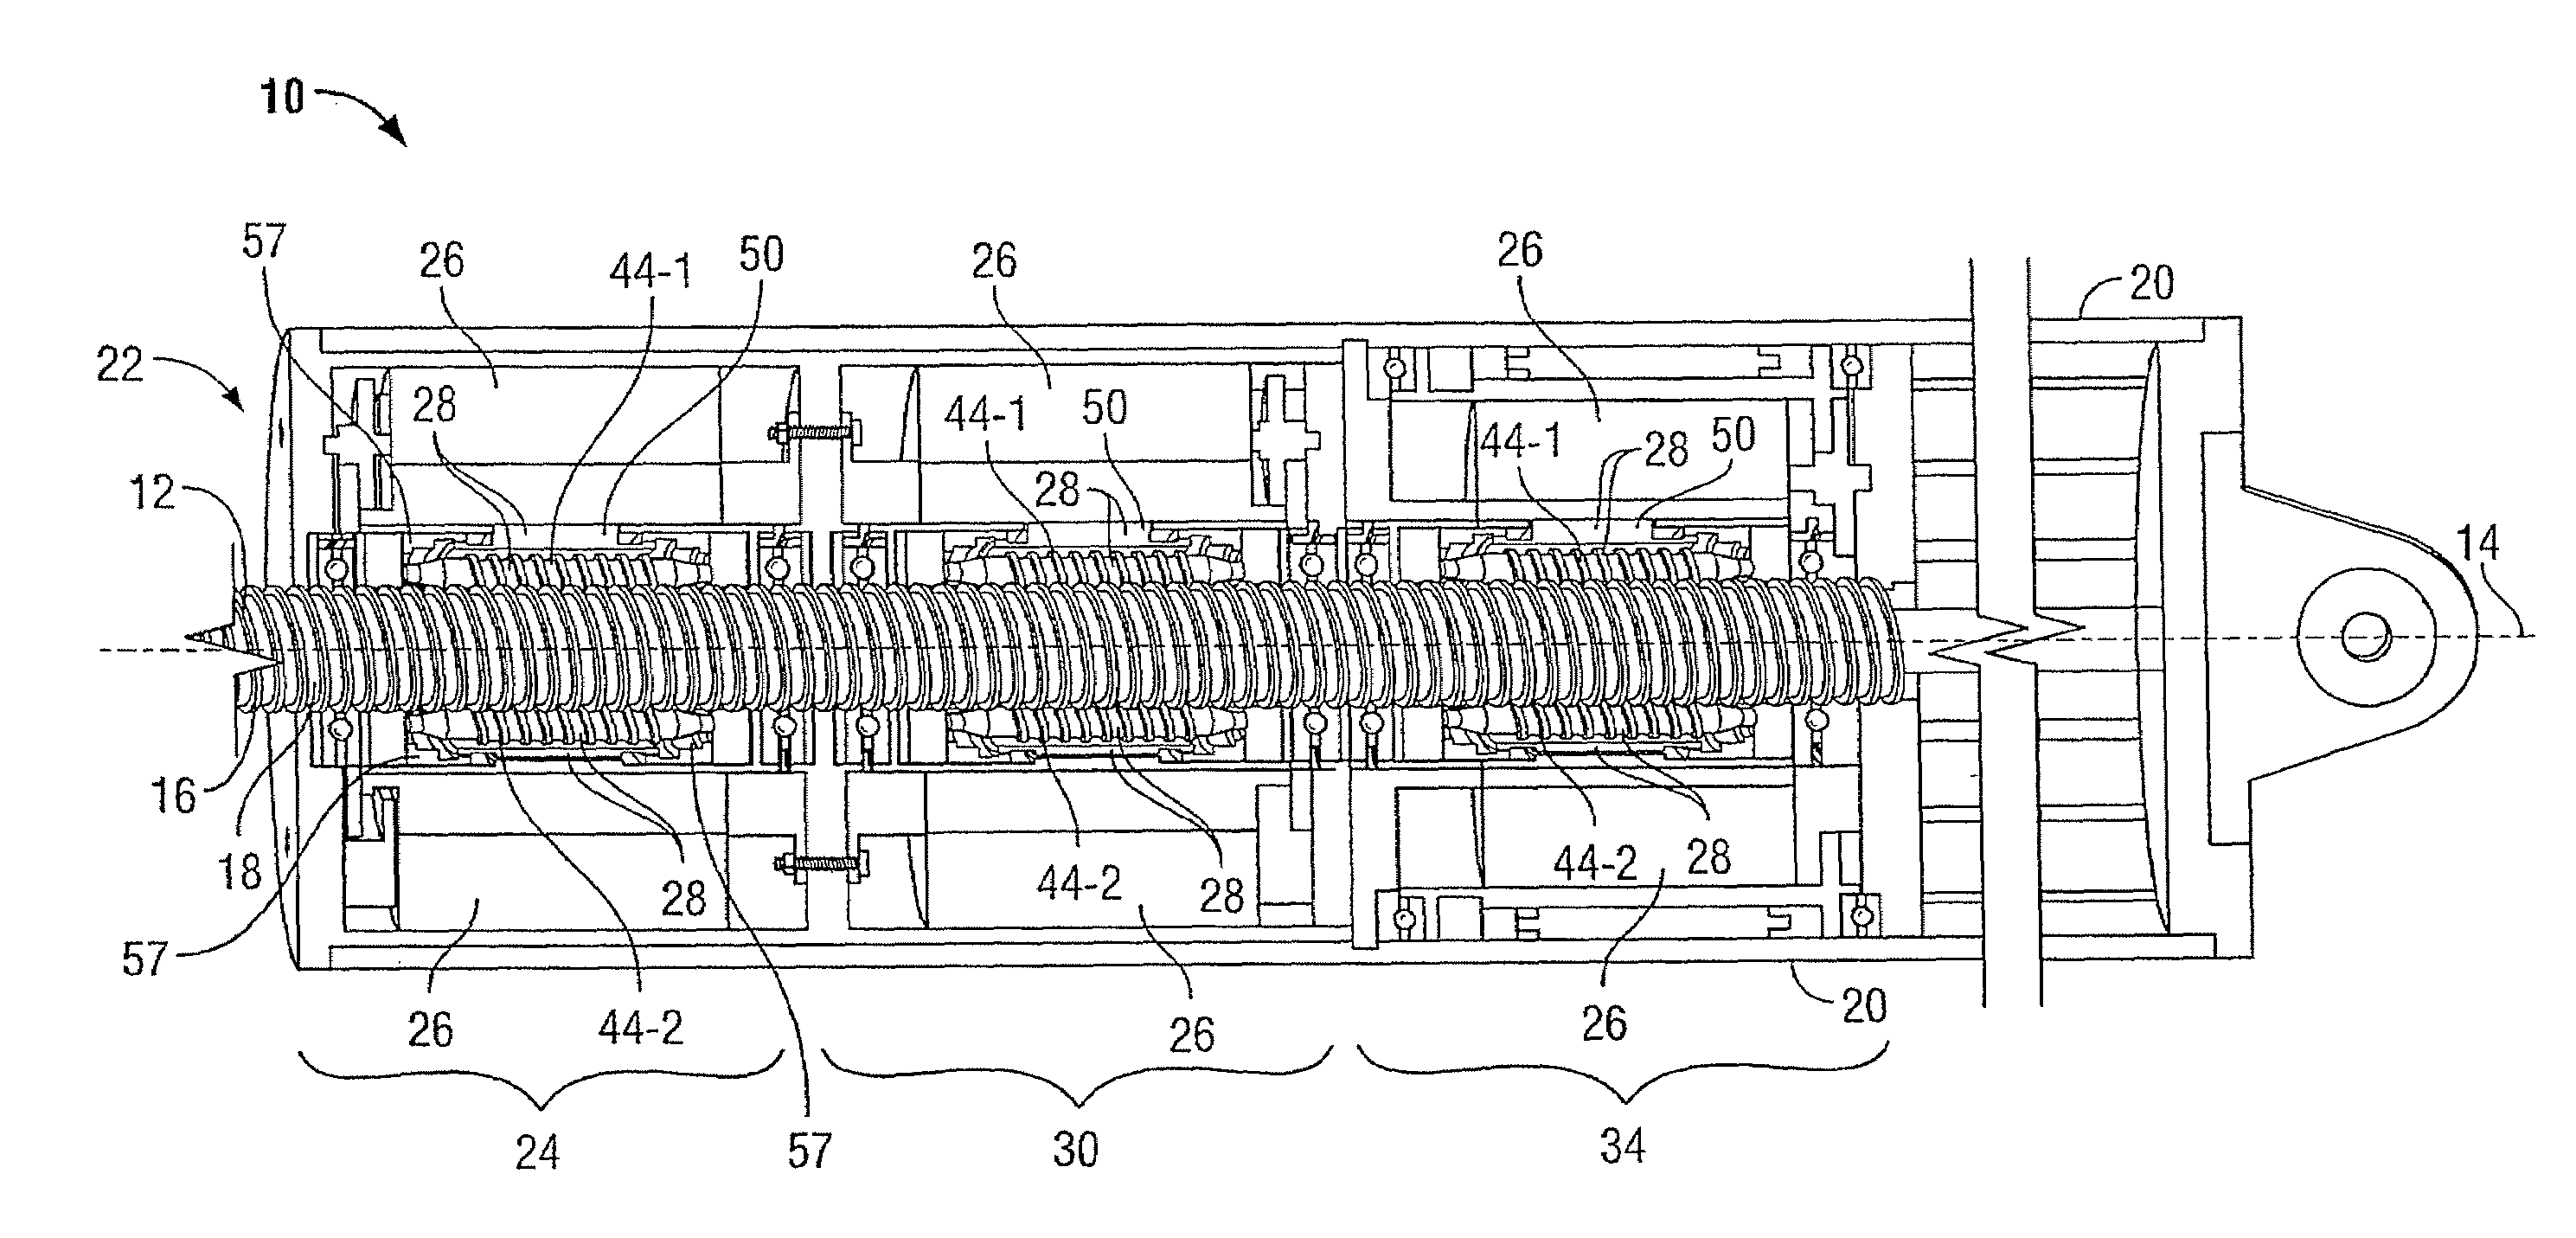 Fault-tolerant electro-mechanical actuator having motor armatures to drive a ram and having an armature release mechanism